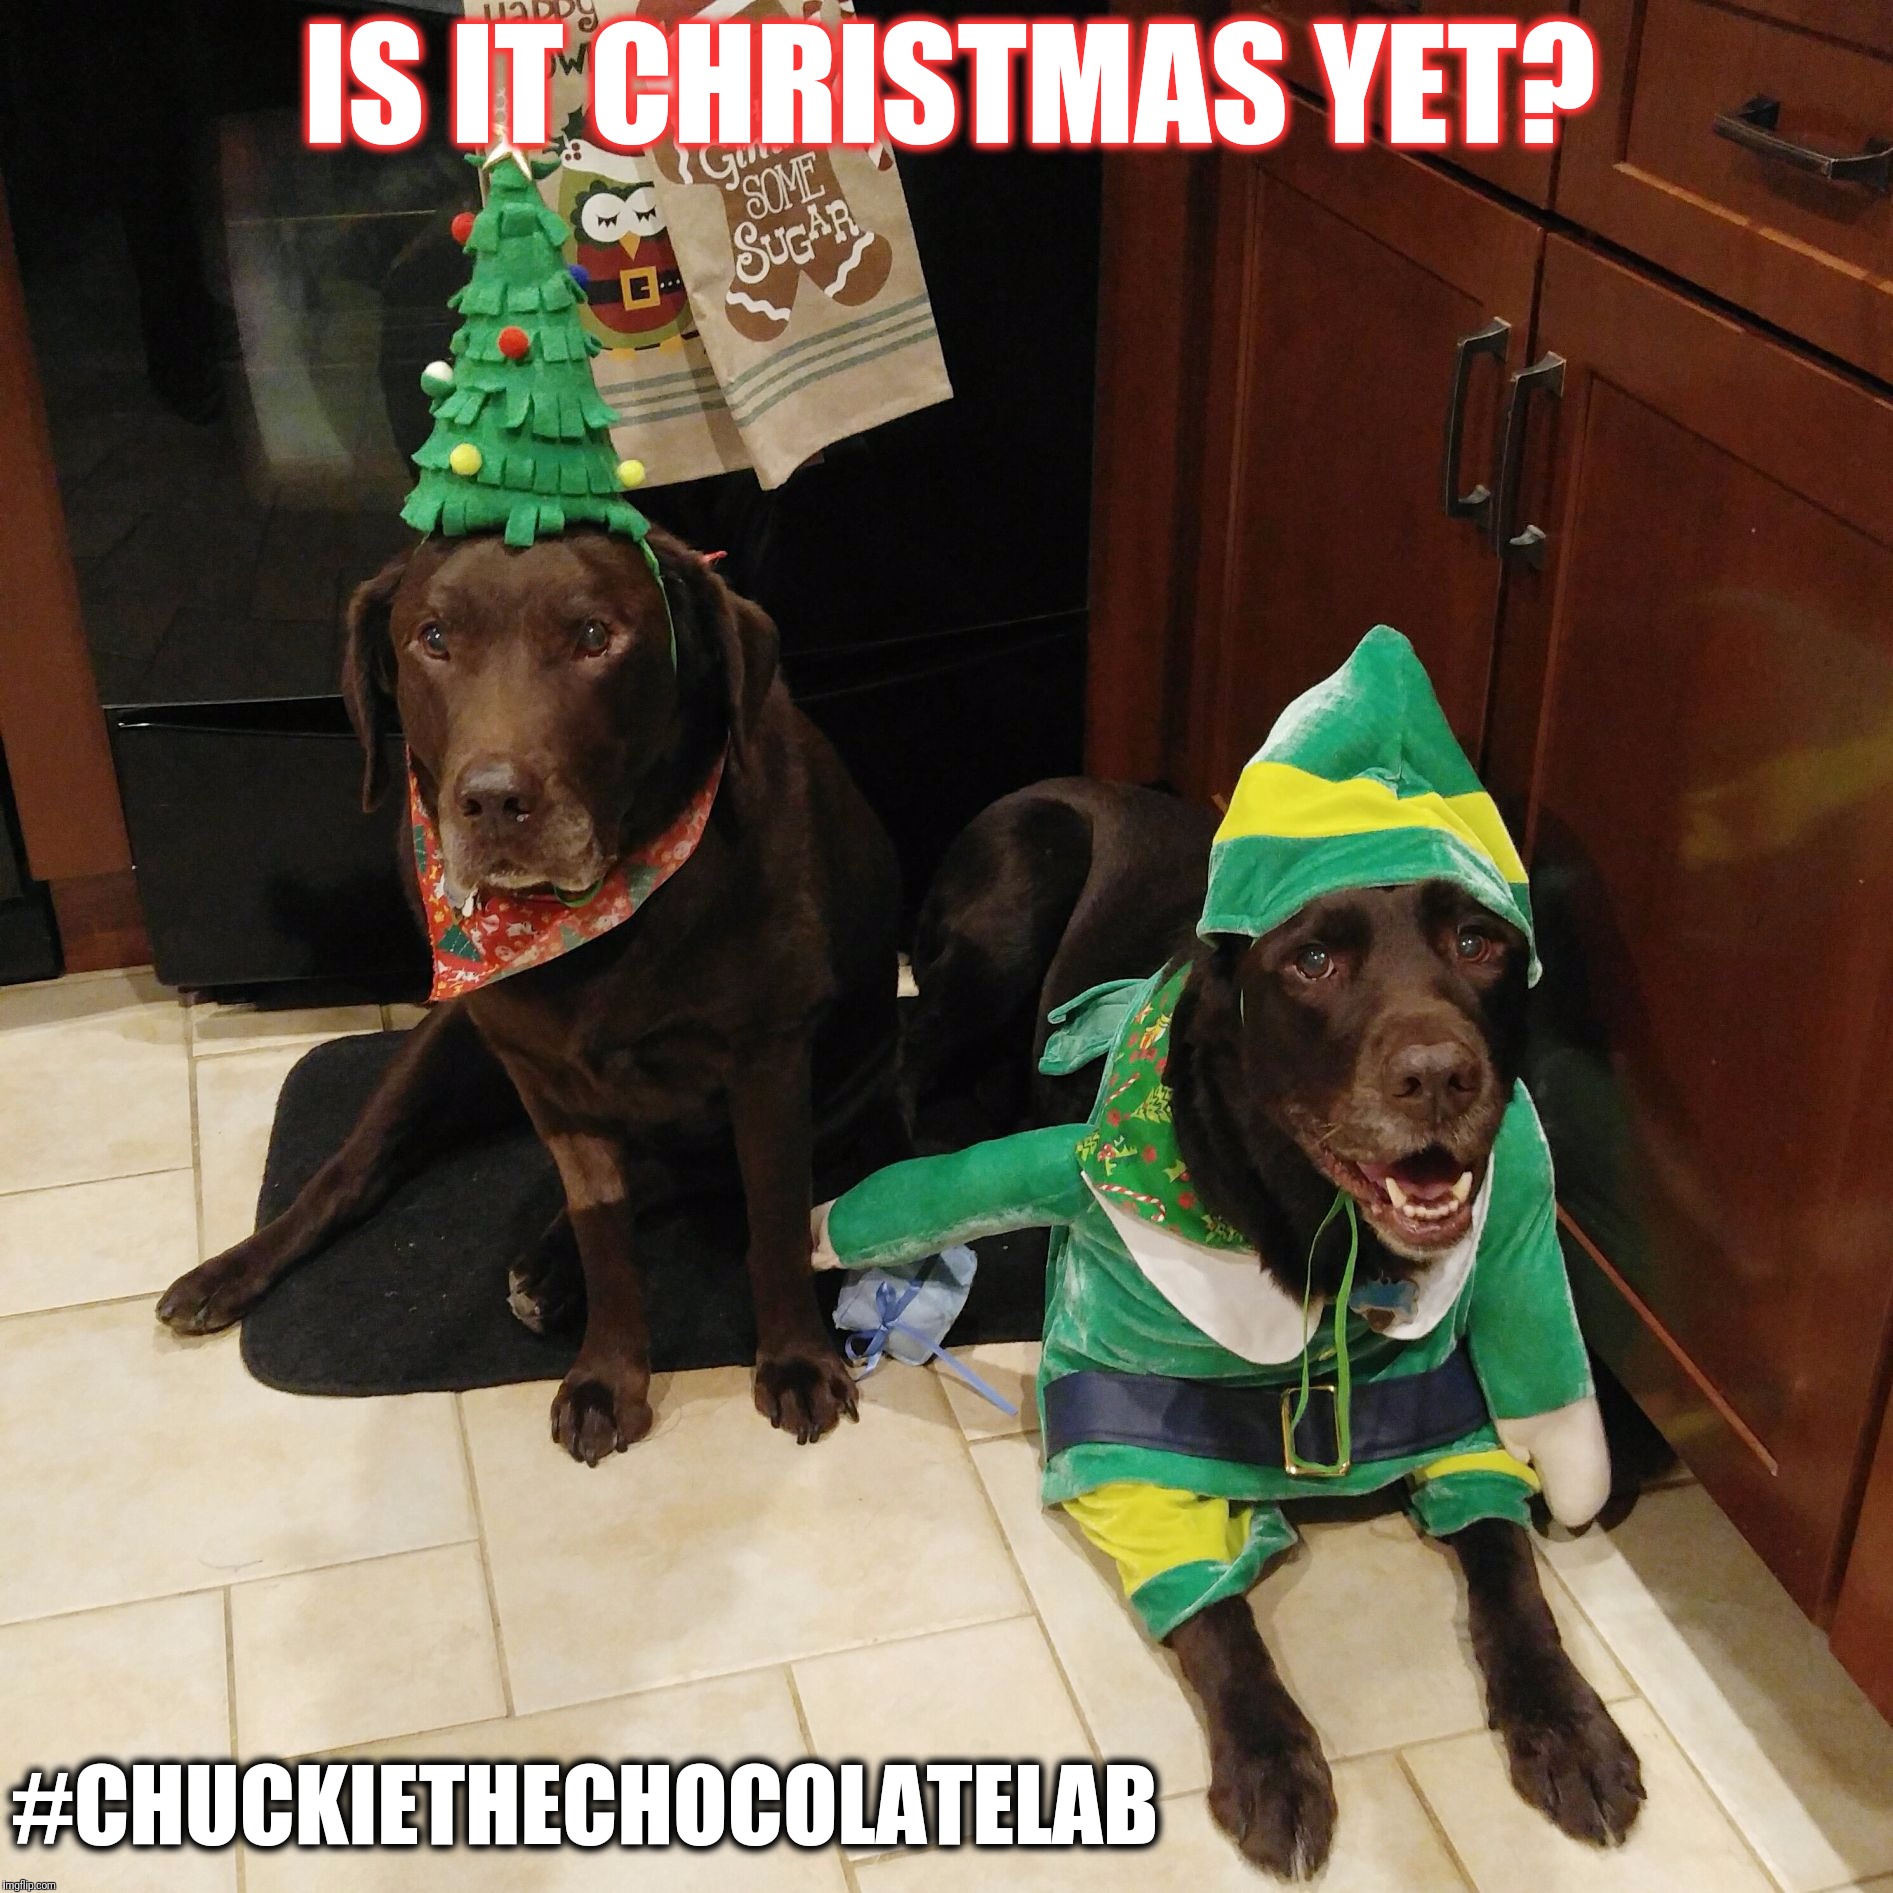 Is it Christmas yet?  | IS IT CHRISTMAS YET? #CHUCKIETHECHOCOLATELAB | image tagged in chuckie the chocolate lab,christmas,holidays,dogs,funny,cute | made w/ Imgflip meme maker